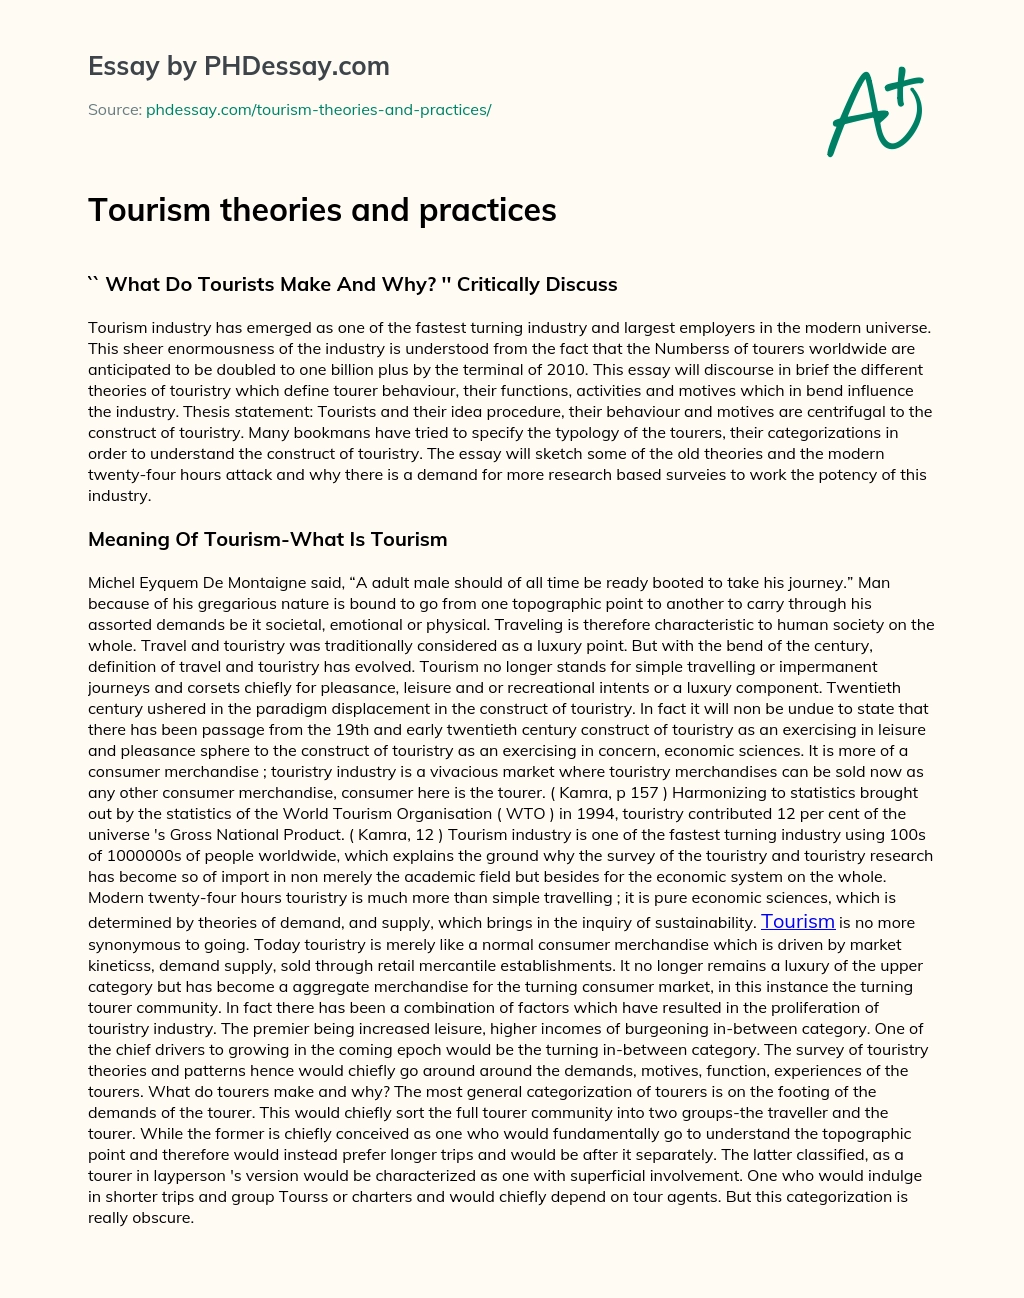 Tourism theories and practices essay